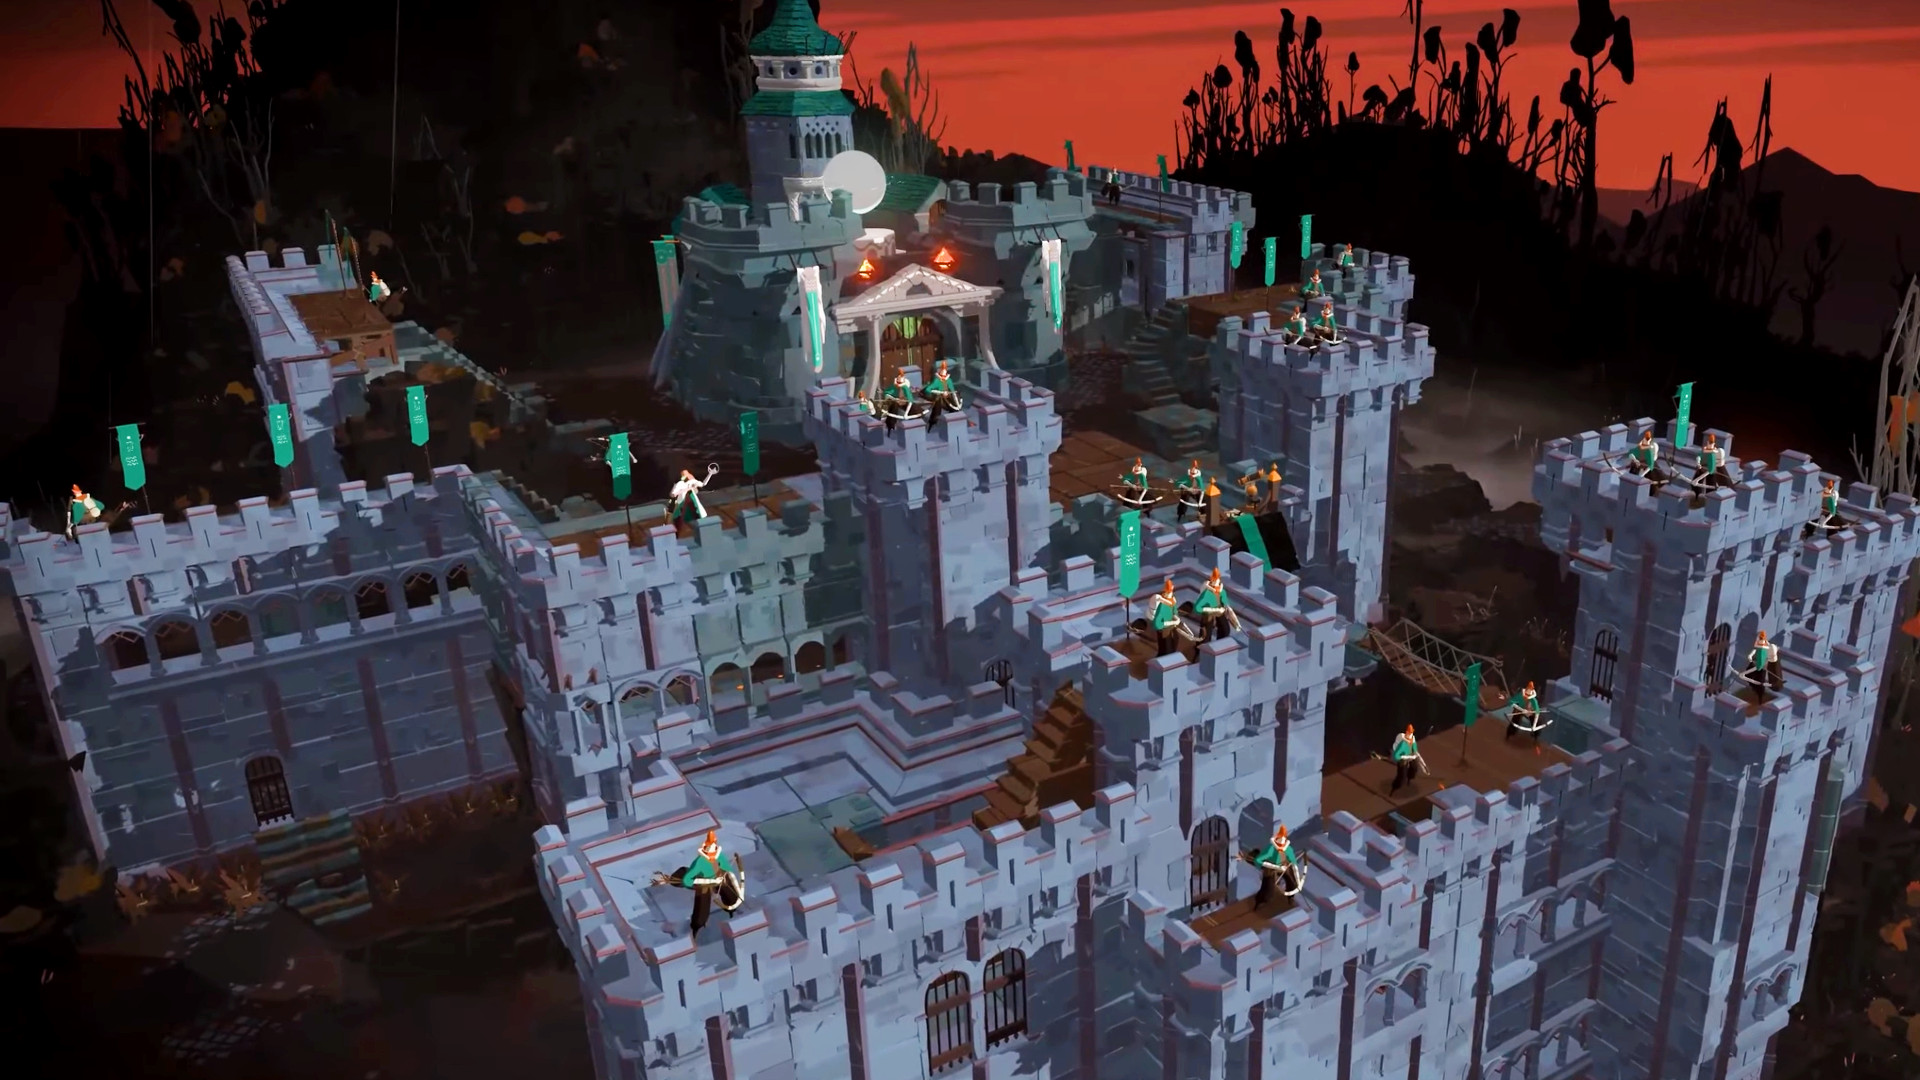 This Warcraft 3 inspired RTS game is like building castles with Lego